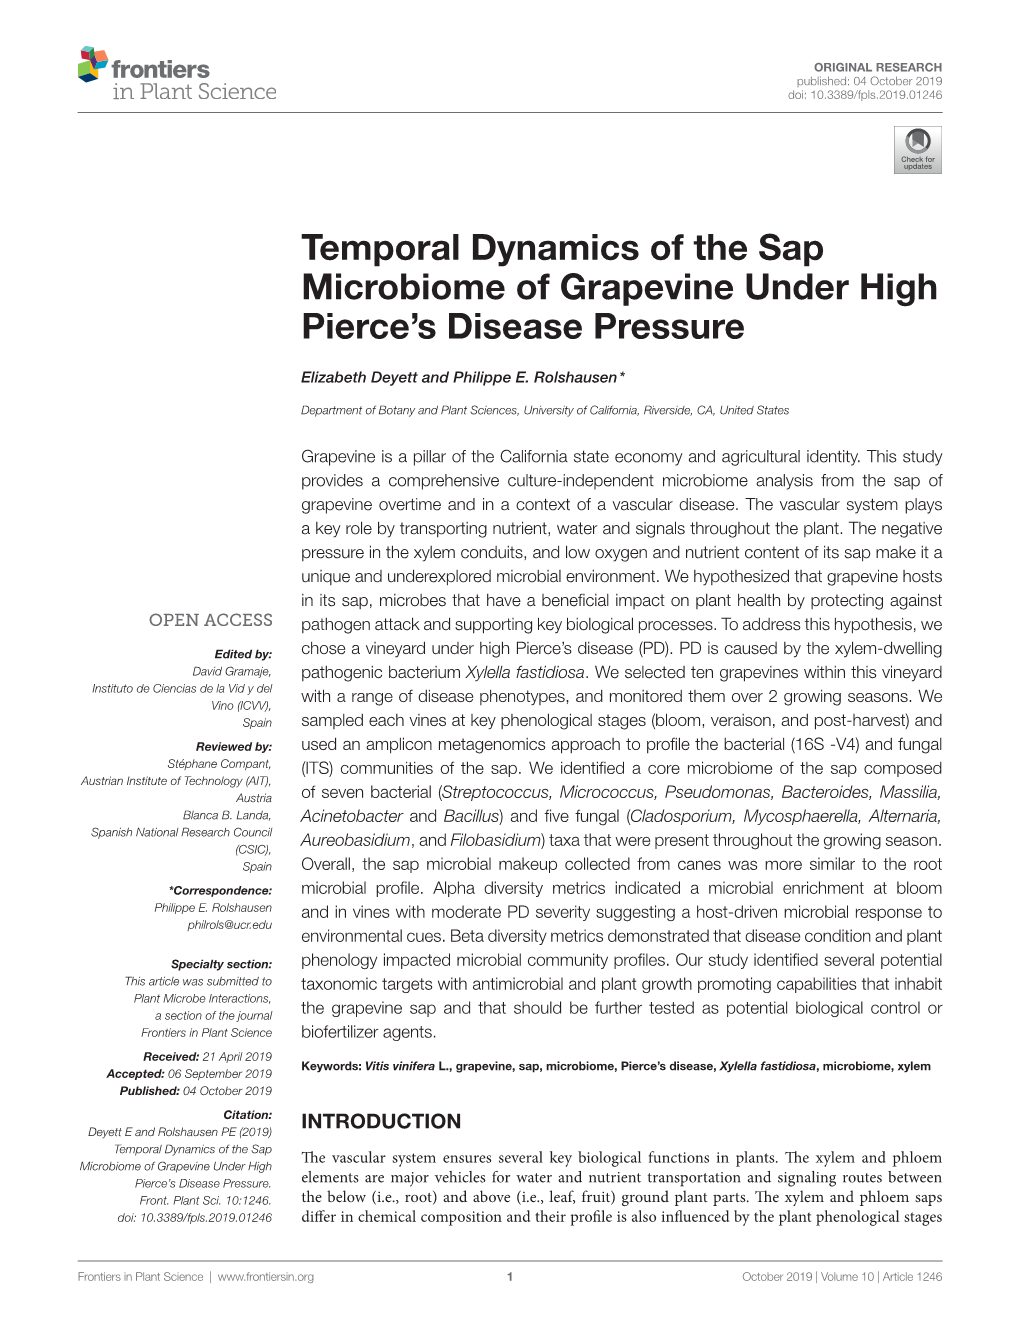 Temporal Dynamics of the Sap Microbiome of Grapevine Under High Pierce’S Disease Pressure